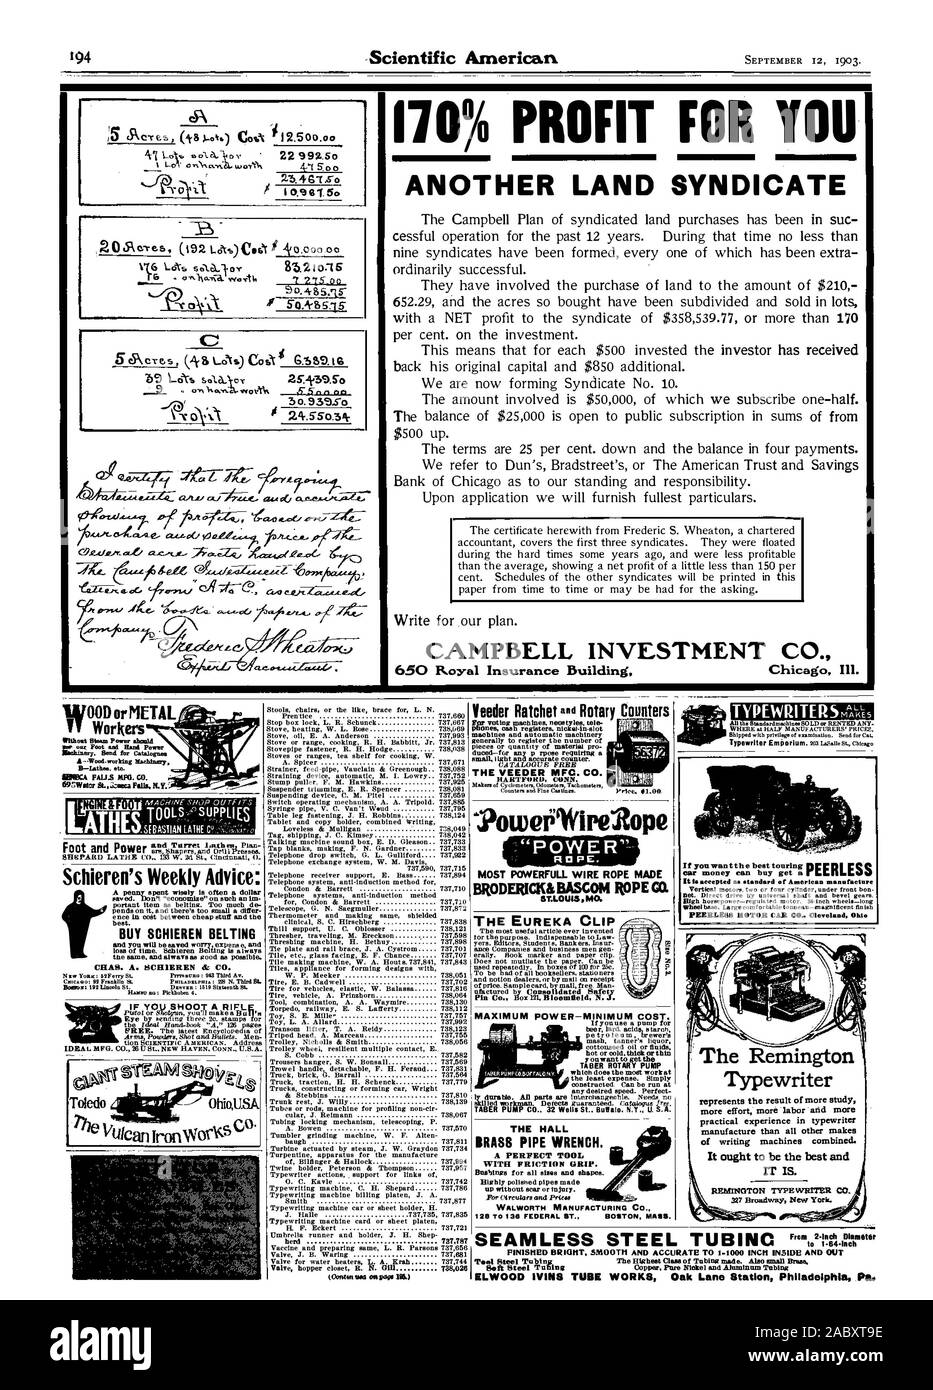 PROFIT FOR YOU ANOTHER LAND SYNDICATE CAMPBELL INVESTMENT CO. 650 Royal Insurance Building Chicag Ill. ceA.A.00 0ae g &Feld-P-(Z fee WitK:l Schieren's Weekly Advice: . loss of time. Scbieren Belting is always ence in cost between cheap stuff and the best. BUY SCHIEREN BELTING CHAS. A. SCHIEREN Liz CO. Eye by serubng tb ree 2c. stamps for MOST POWERFOLL WIRE ROPE MADE BRODERICK& BASCOM ROPE CO. ST.LOULS.MO. THE EUREKA CLIP POWER-MINIMUM COST. If youuse a pump for TABER ROTARY PUMP p constructed. Can be run at any desired speed. Perfect TABER PUMP 00. 32 Wells St Buffalo. N.Y. U. S. A. THE HALL Stock Photo